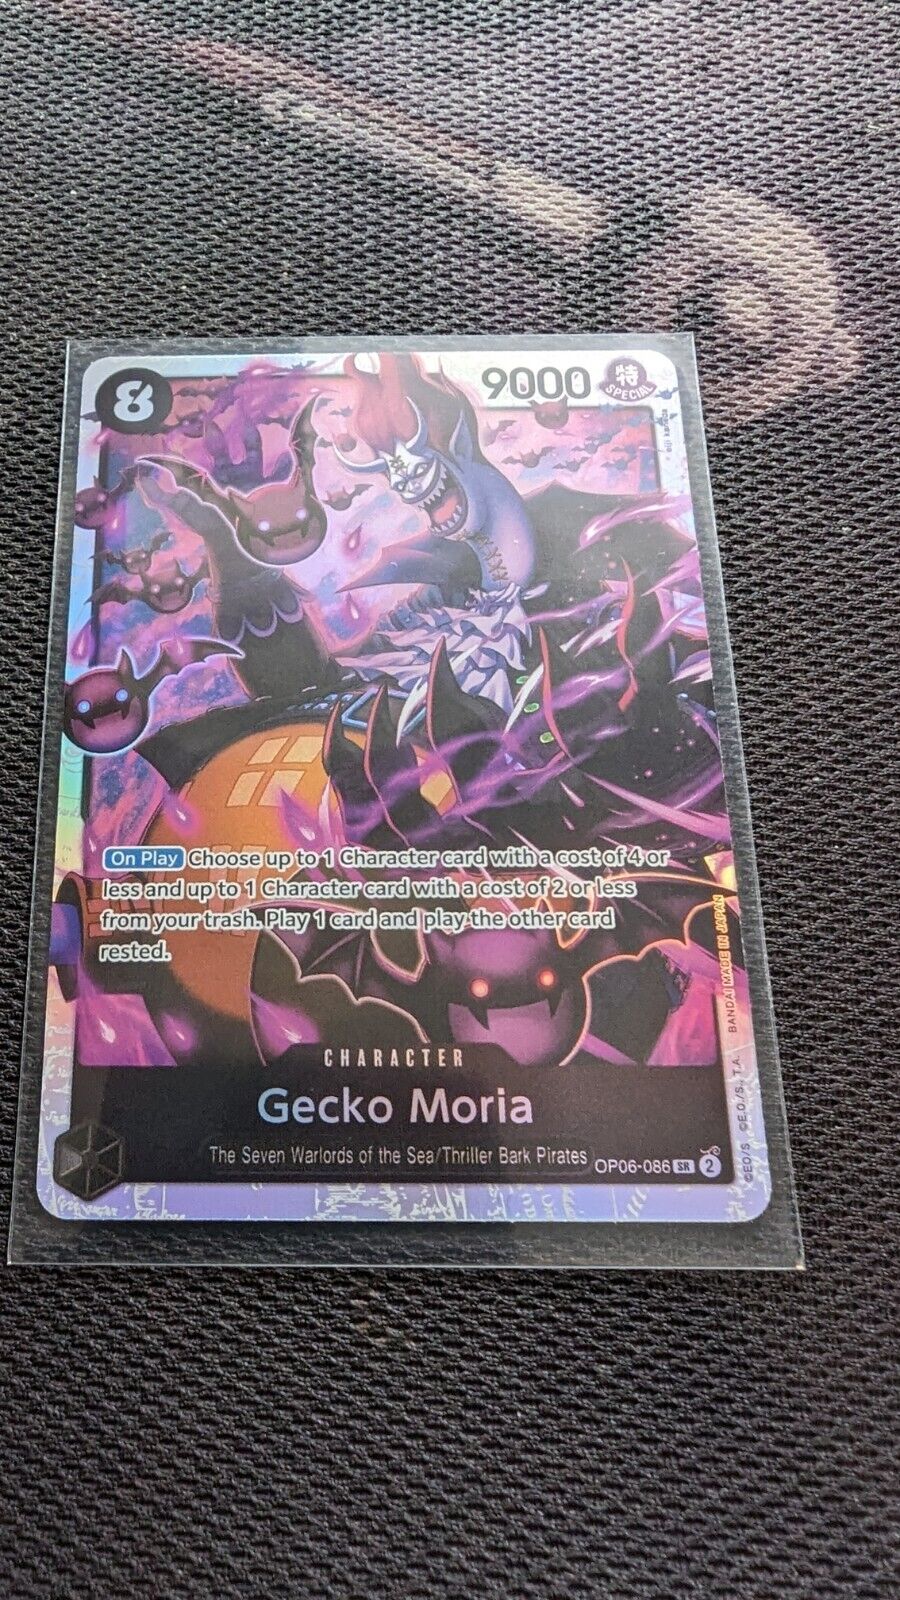 OP06-086 Gecko Moria : Super Rare One Piece English TCG Card : OP06: Wings Of Th